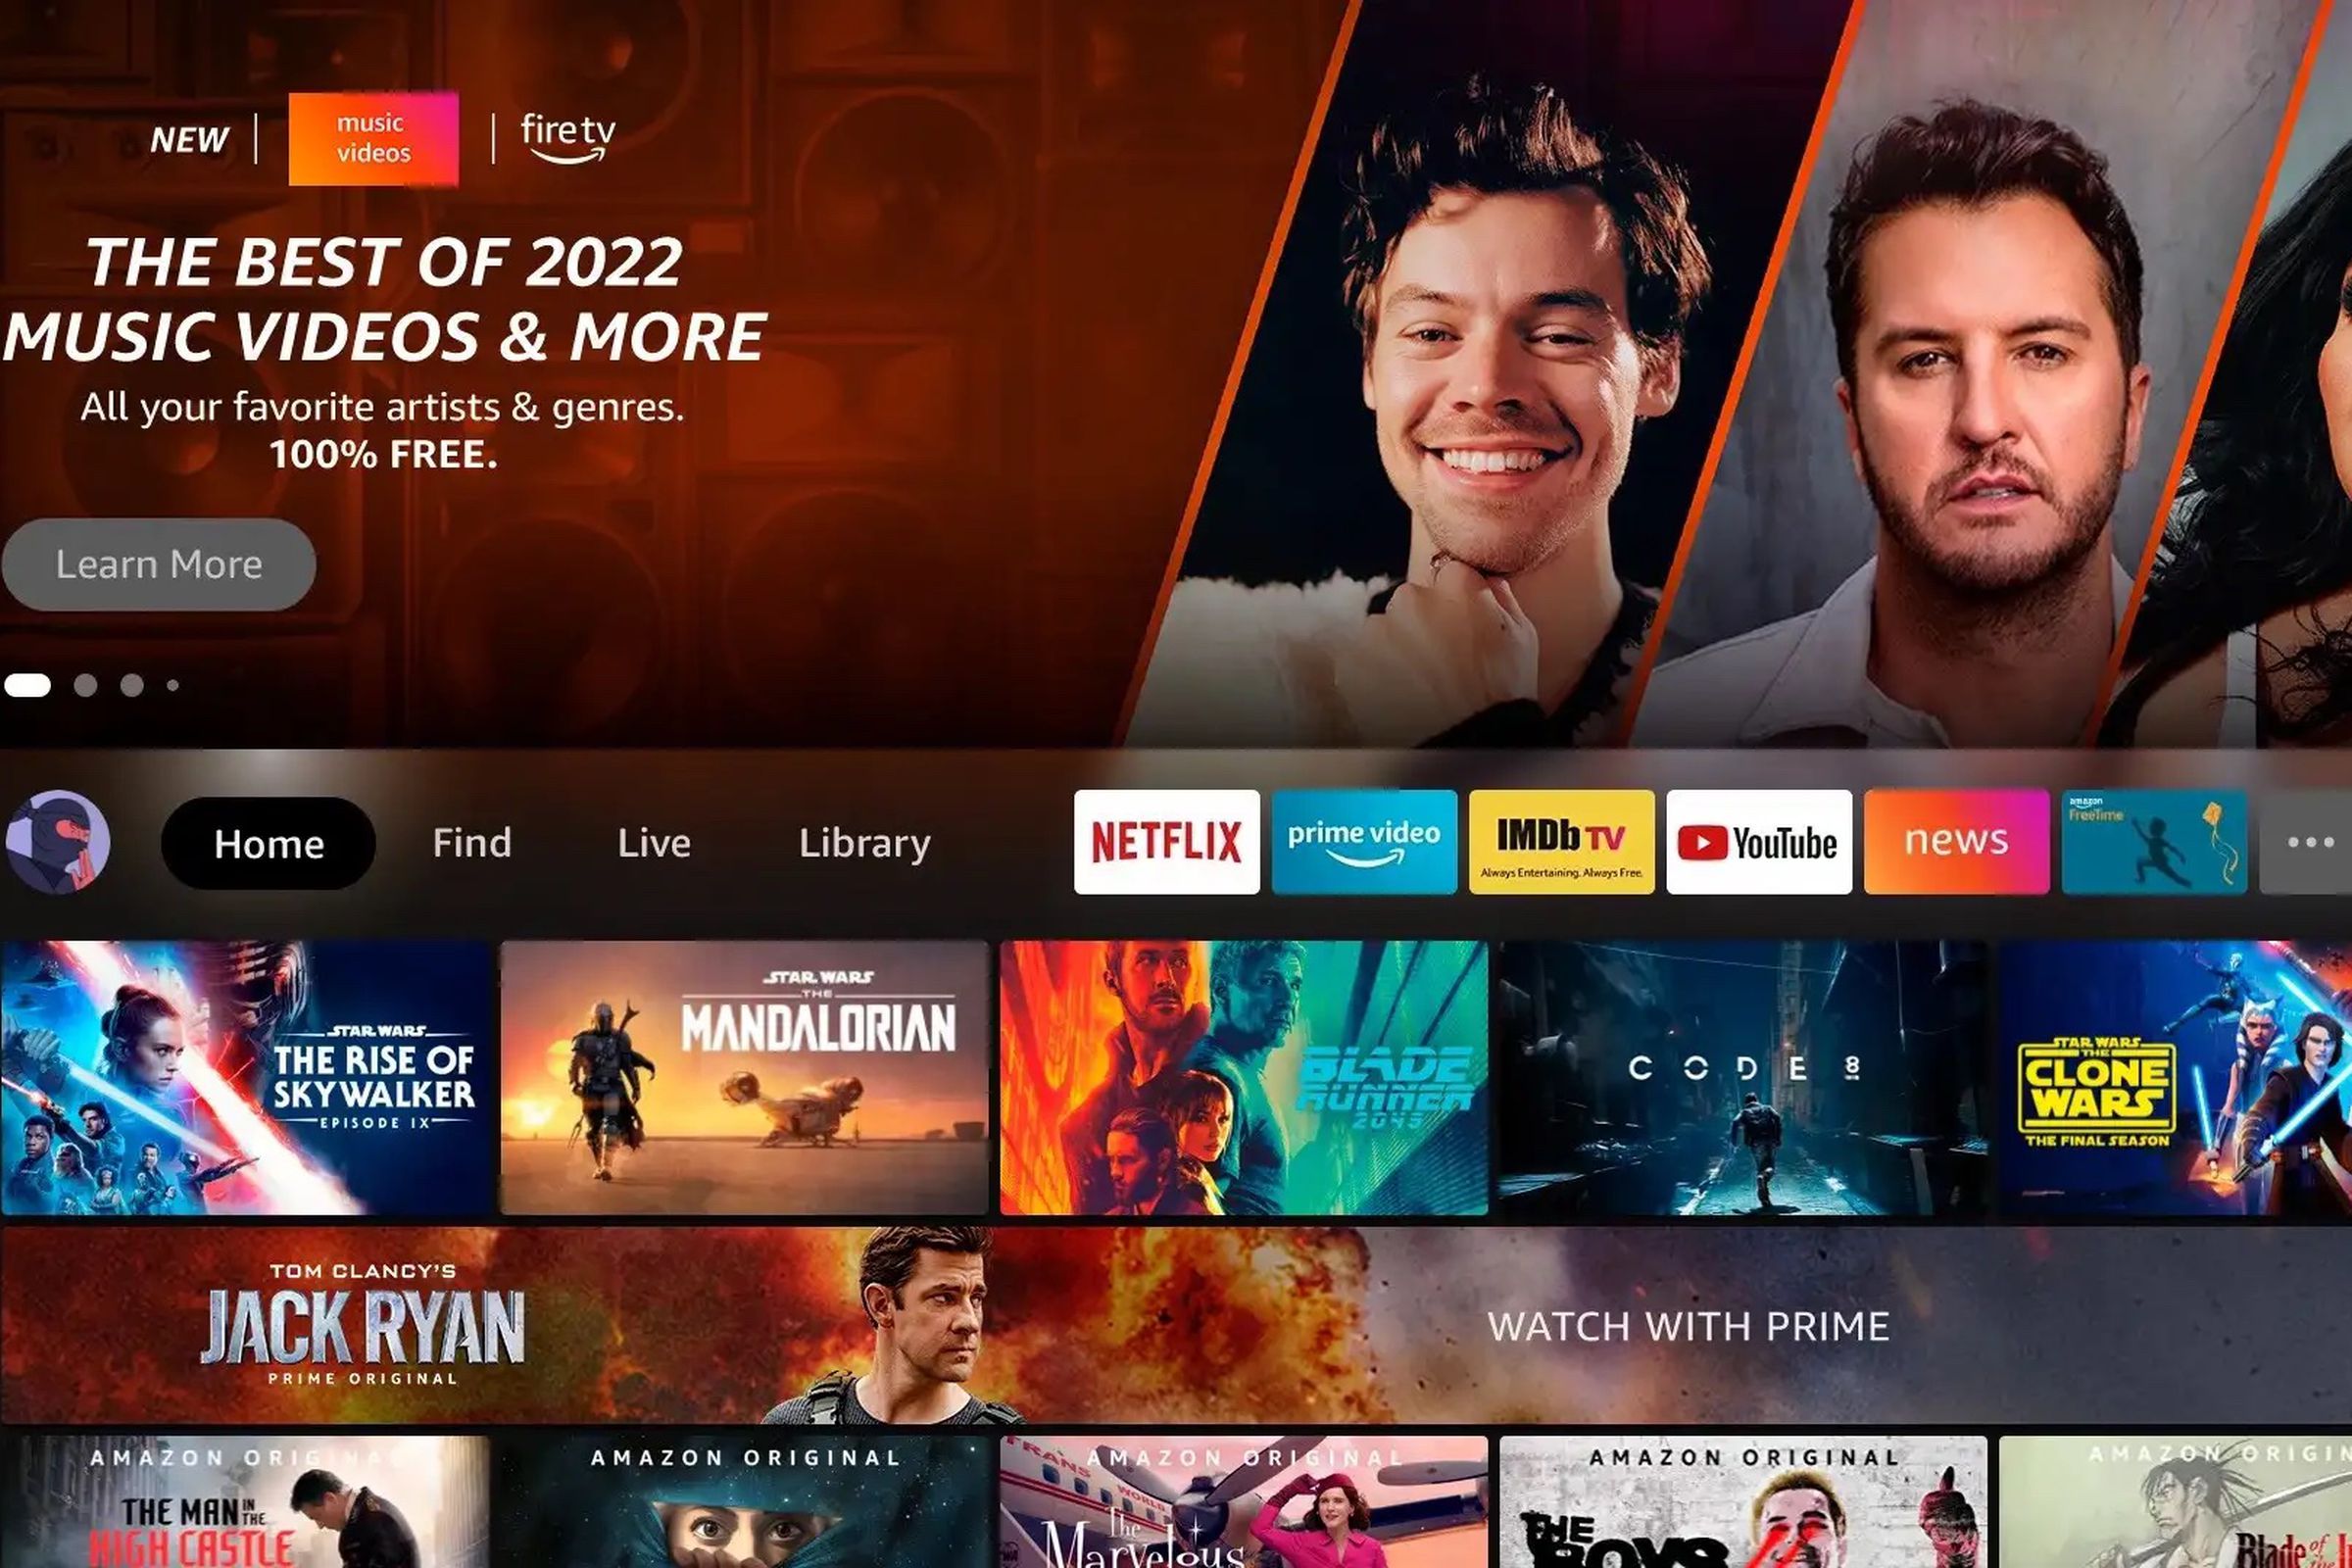 An image of the Fire TV interface showing the new music videos section.